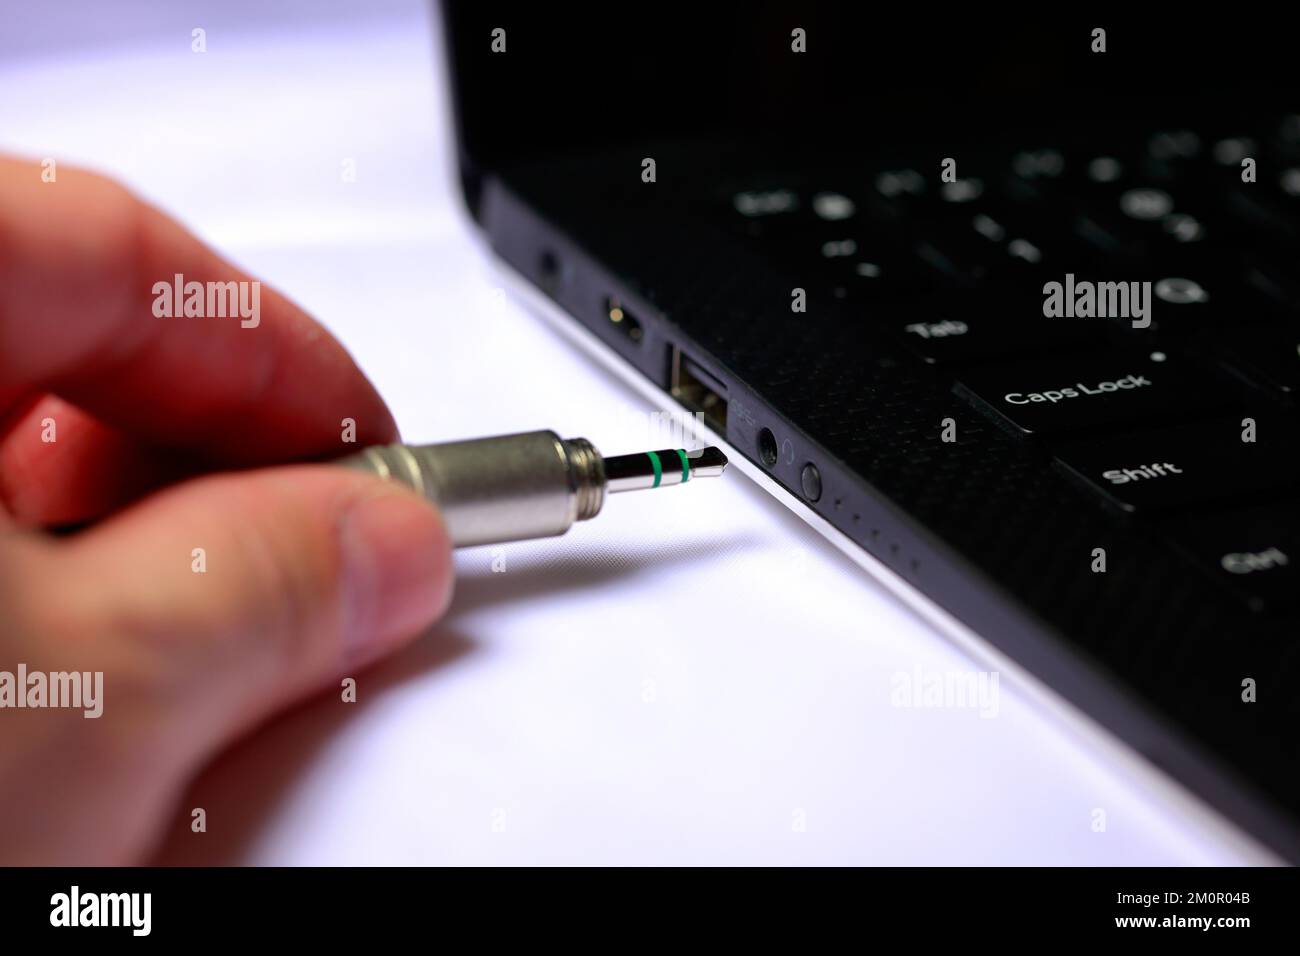 A person plugging a 3.5mm audio plug into a headphone jack on the side of a laptop. Stock Photo